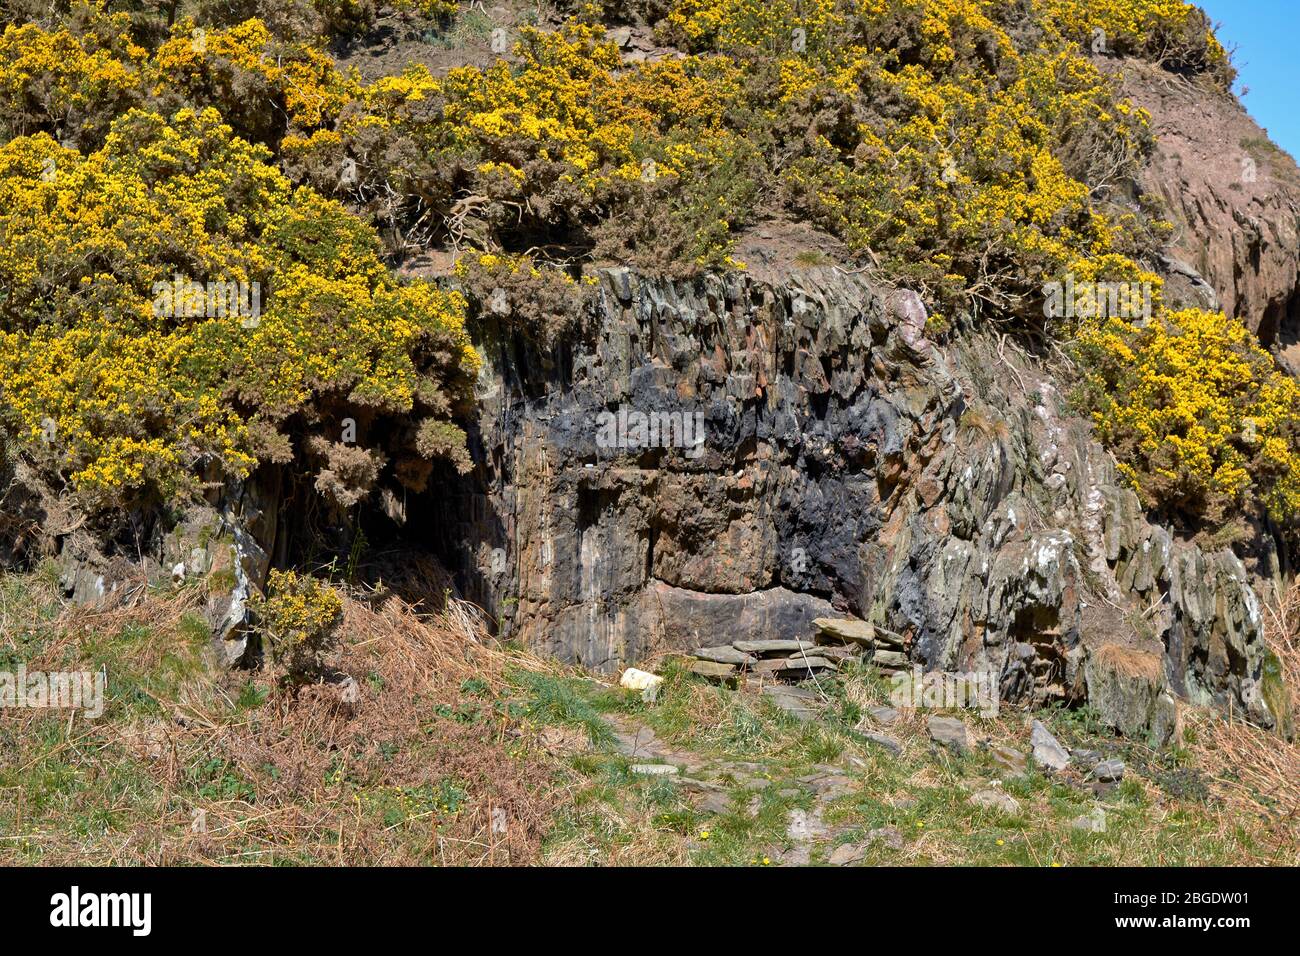 SUNNYSIDE BAY CULLEN MORAY FIRTH SCOTLAND YELLOW GORSE AND THE ROCKY REMAINS OF CHARLIE'S CAVE Stock Photo